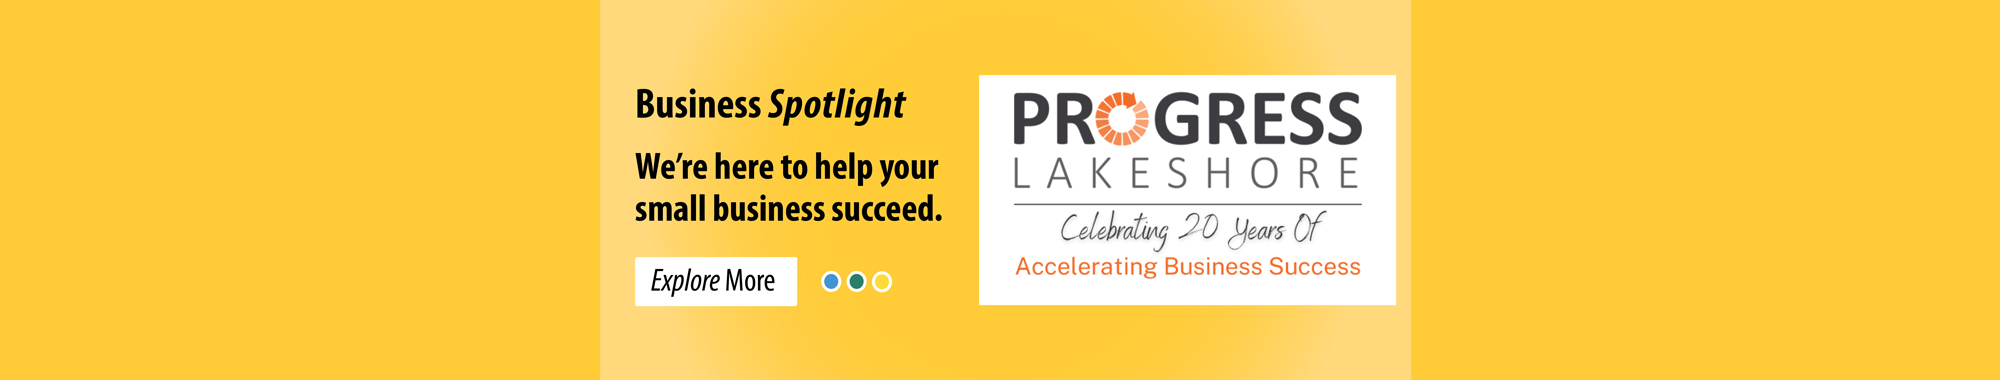 Business Spotlight - We're here to help your small business succeed.